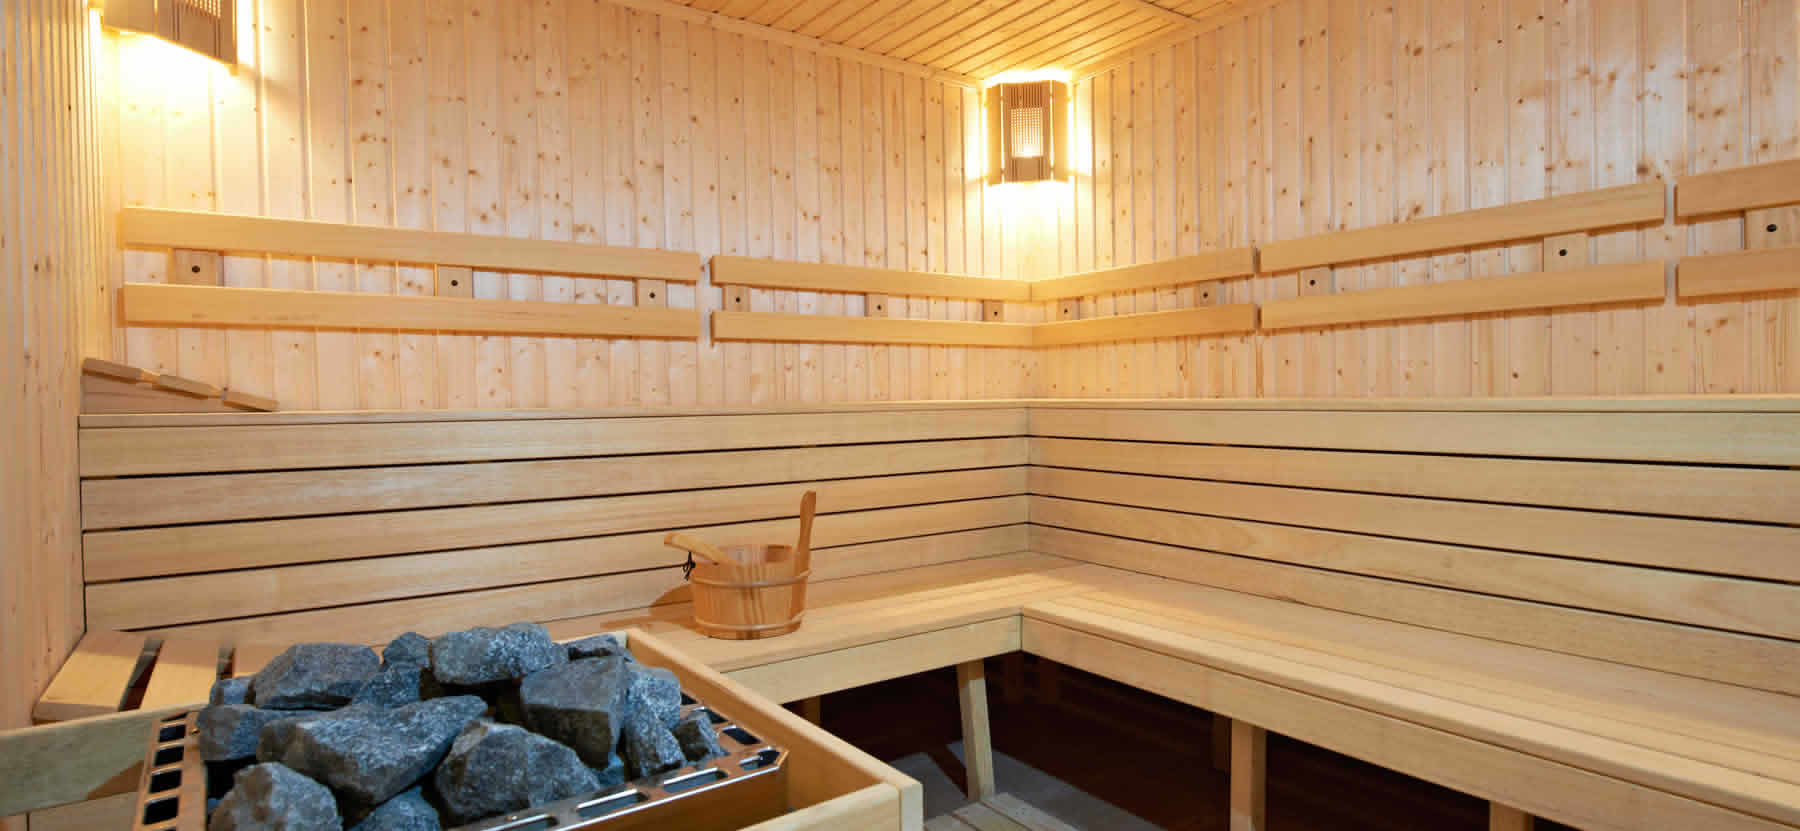 Quality Pool & Spa of Moorhead, Minnesota can repair your sauna and more.